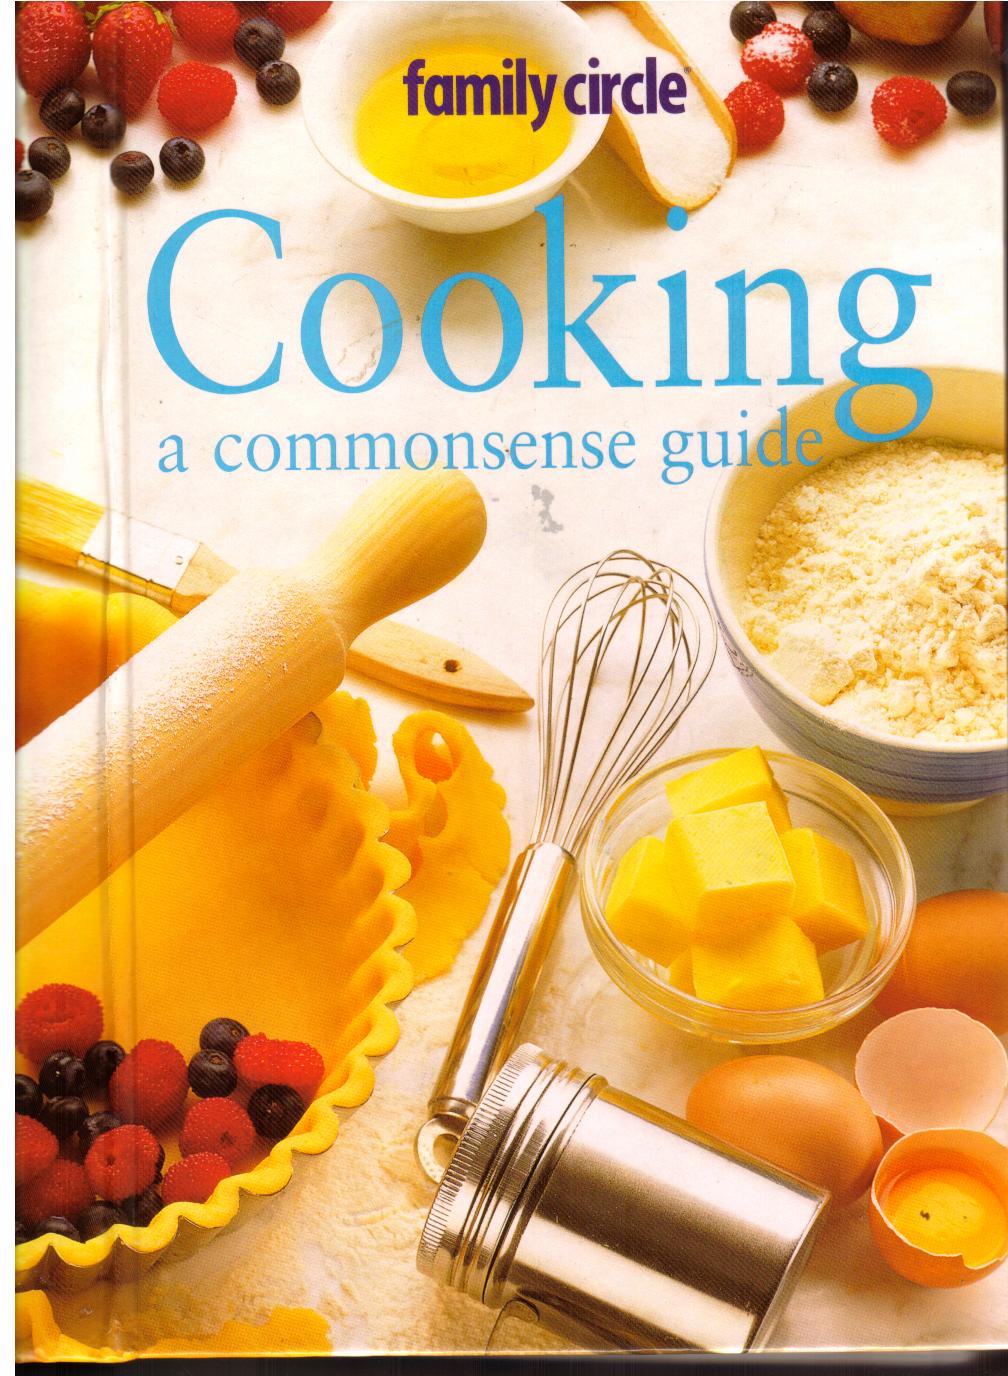 commonsense guide to cooking